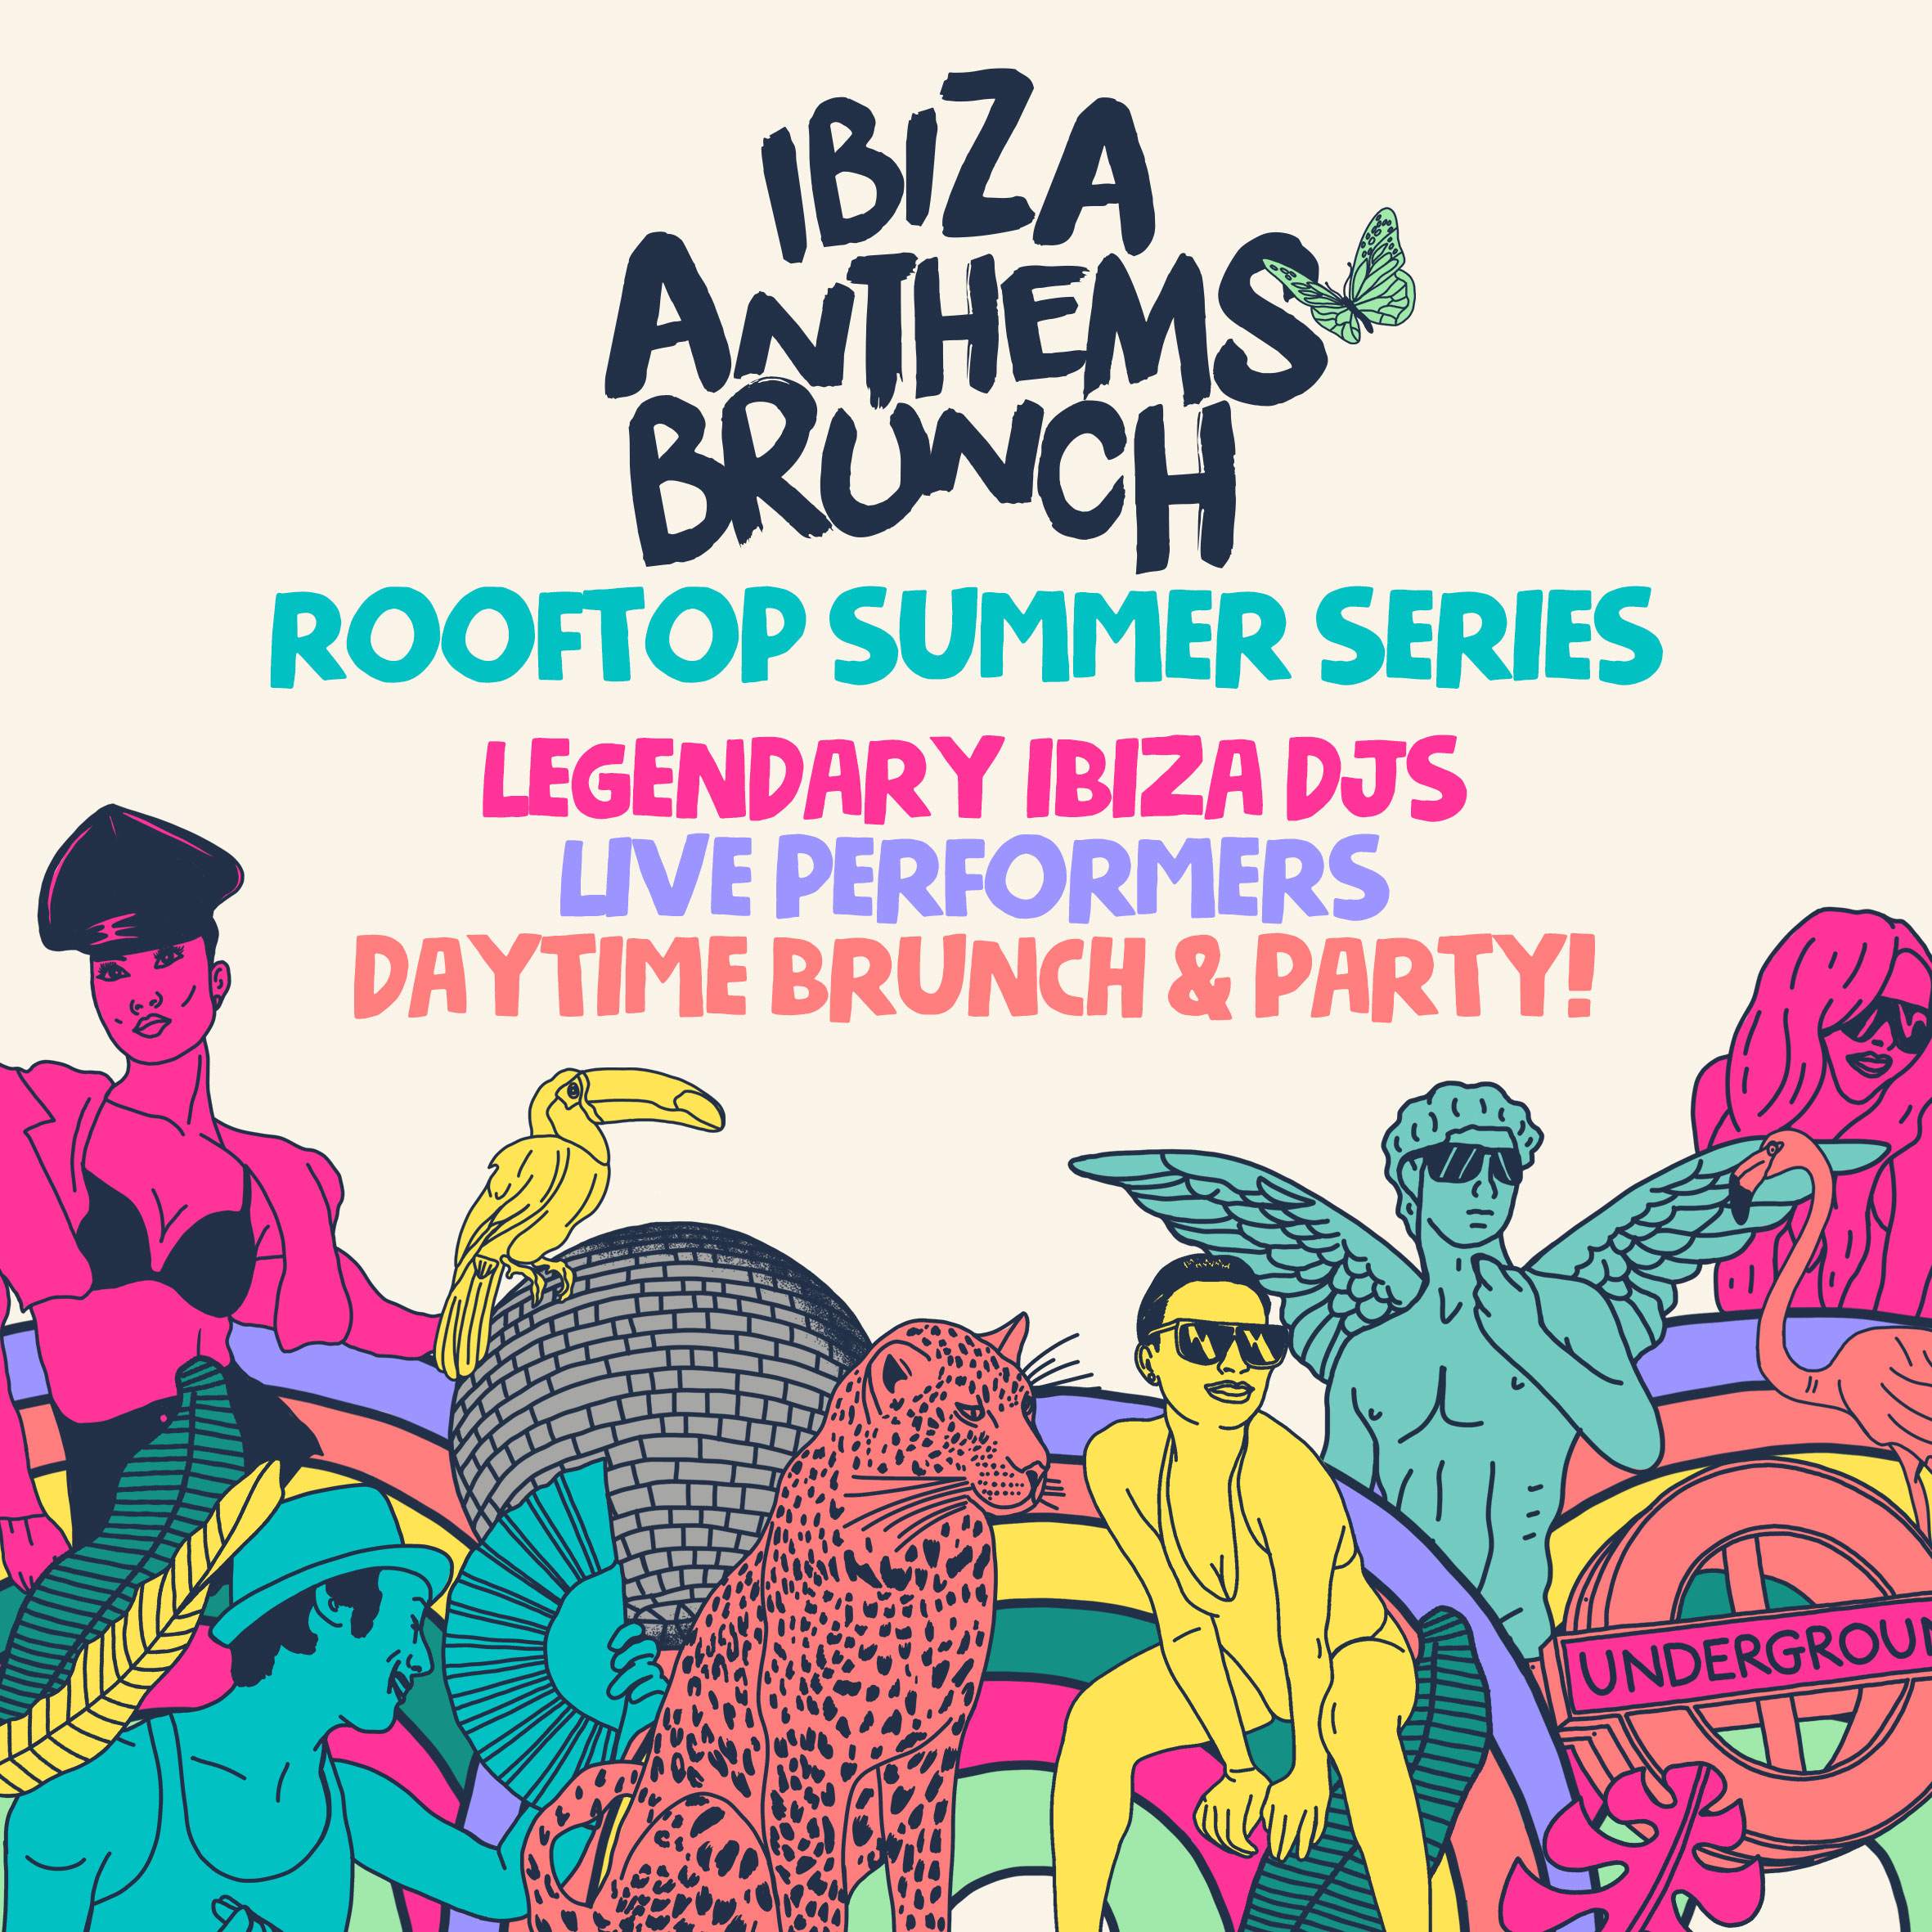 Ibiza Anthems Brunch Rooftop Party - フライヤー表